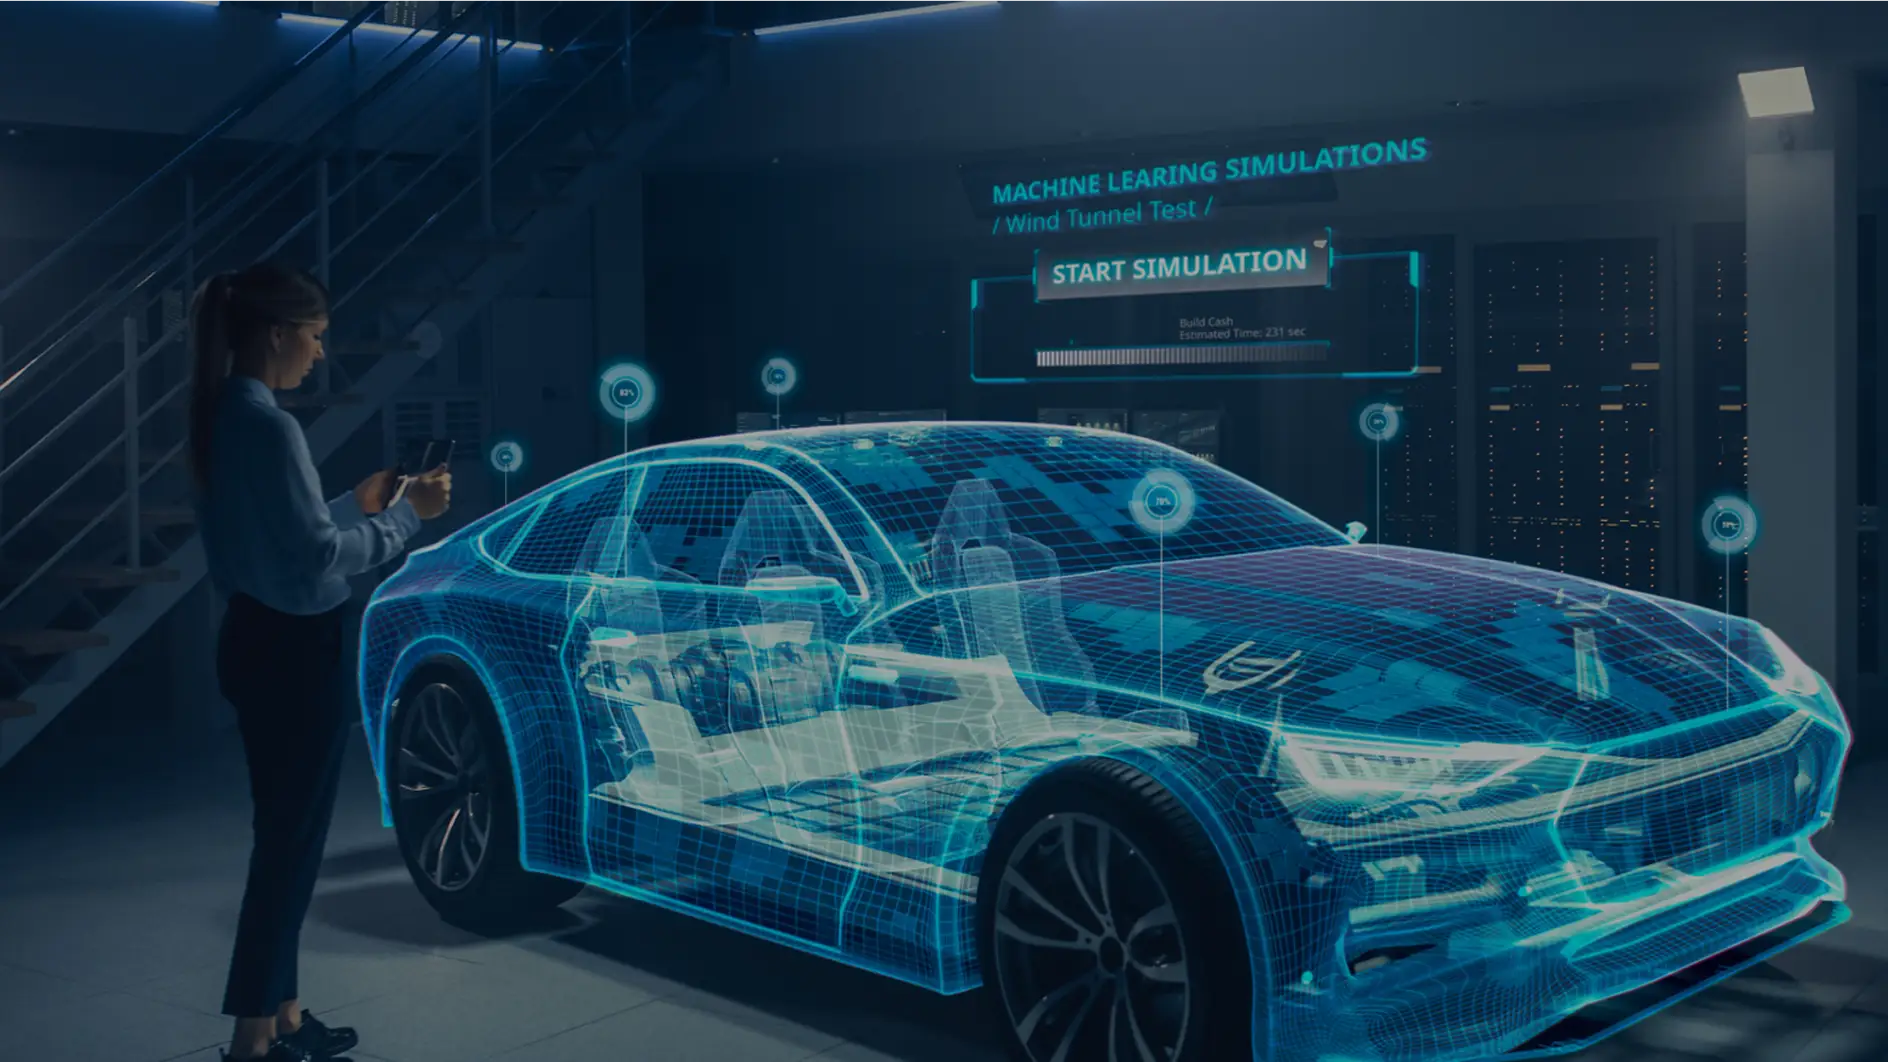 Female Automotive Engineer Uses Digital Tablet with Augmented Reality for Car Design Analysis and Improvement. 3D Graphics Visualization Shows Fully Developed Vehicle Prototype Analysed and Optimized